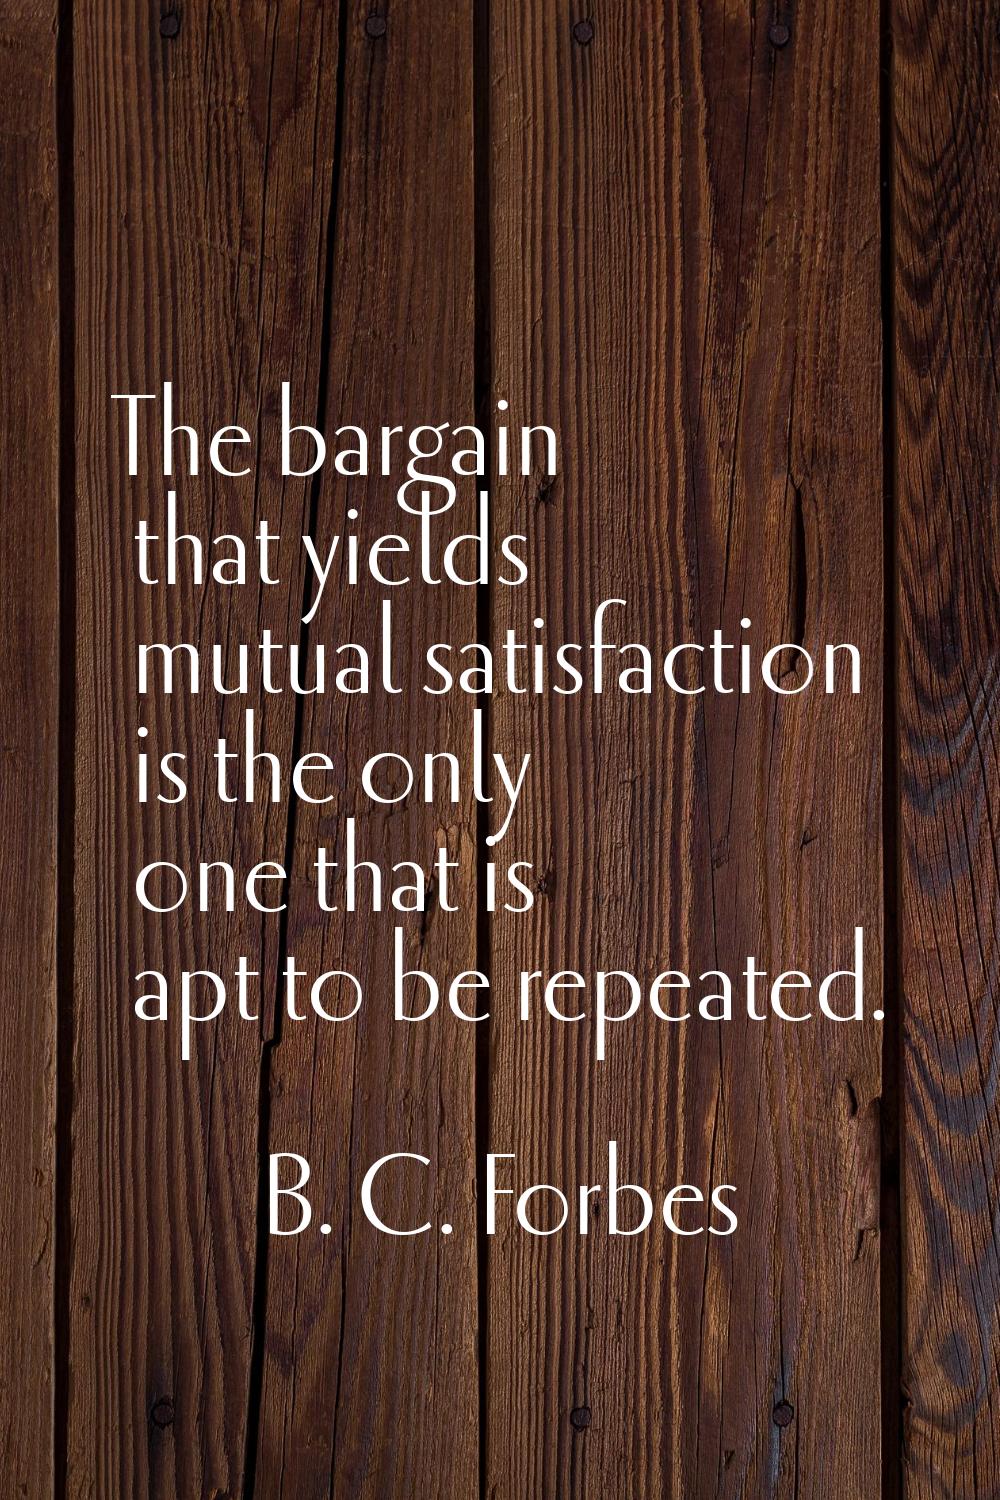 The bargain that yields mutual satisfaction is the only one that is apt to be repeated.